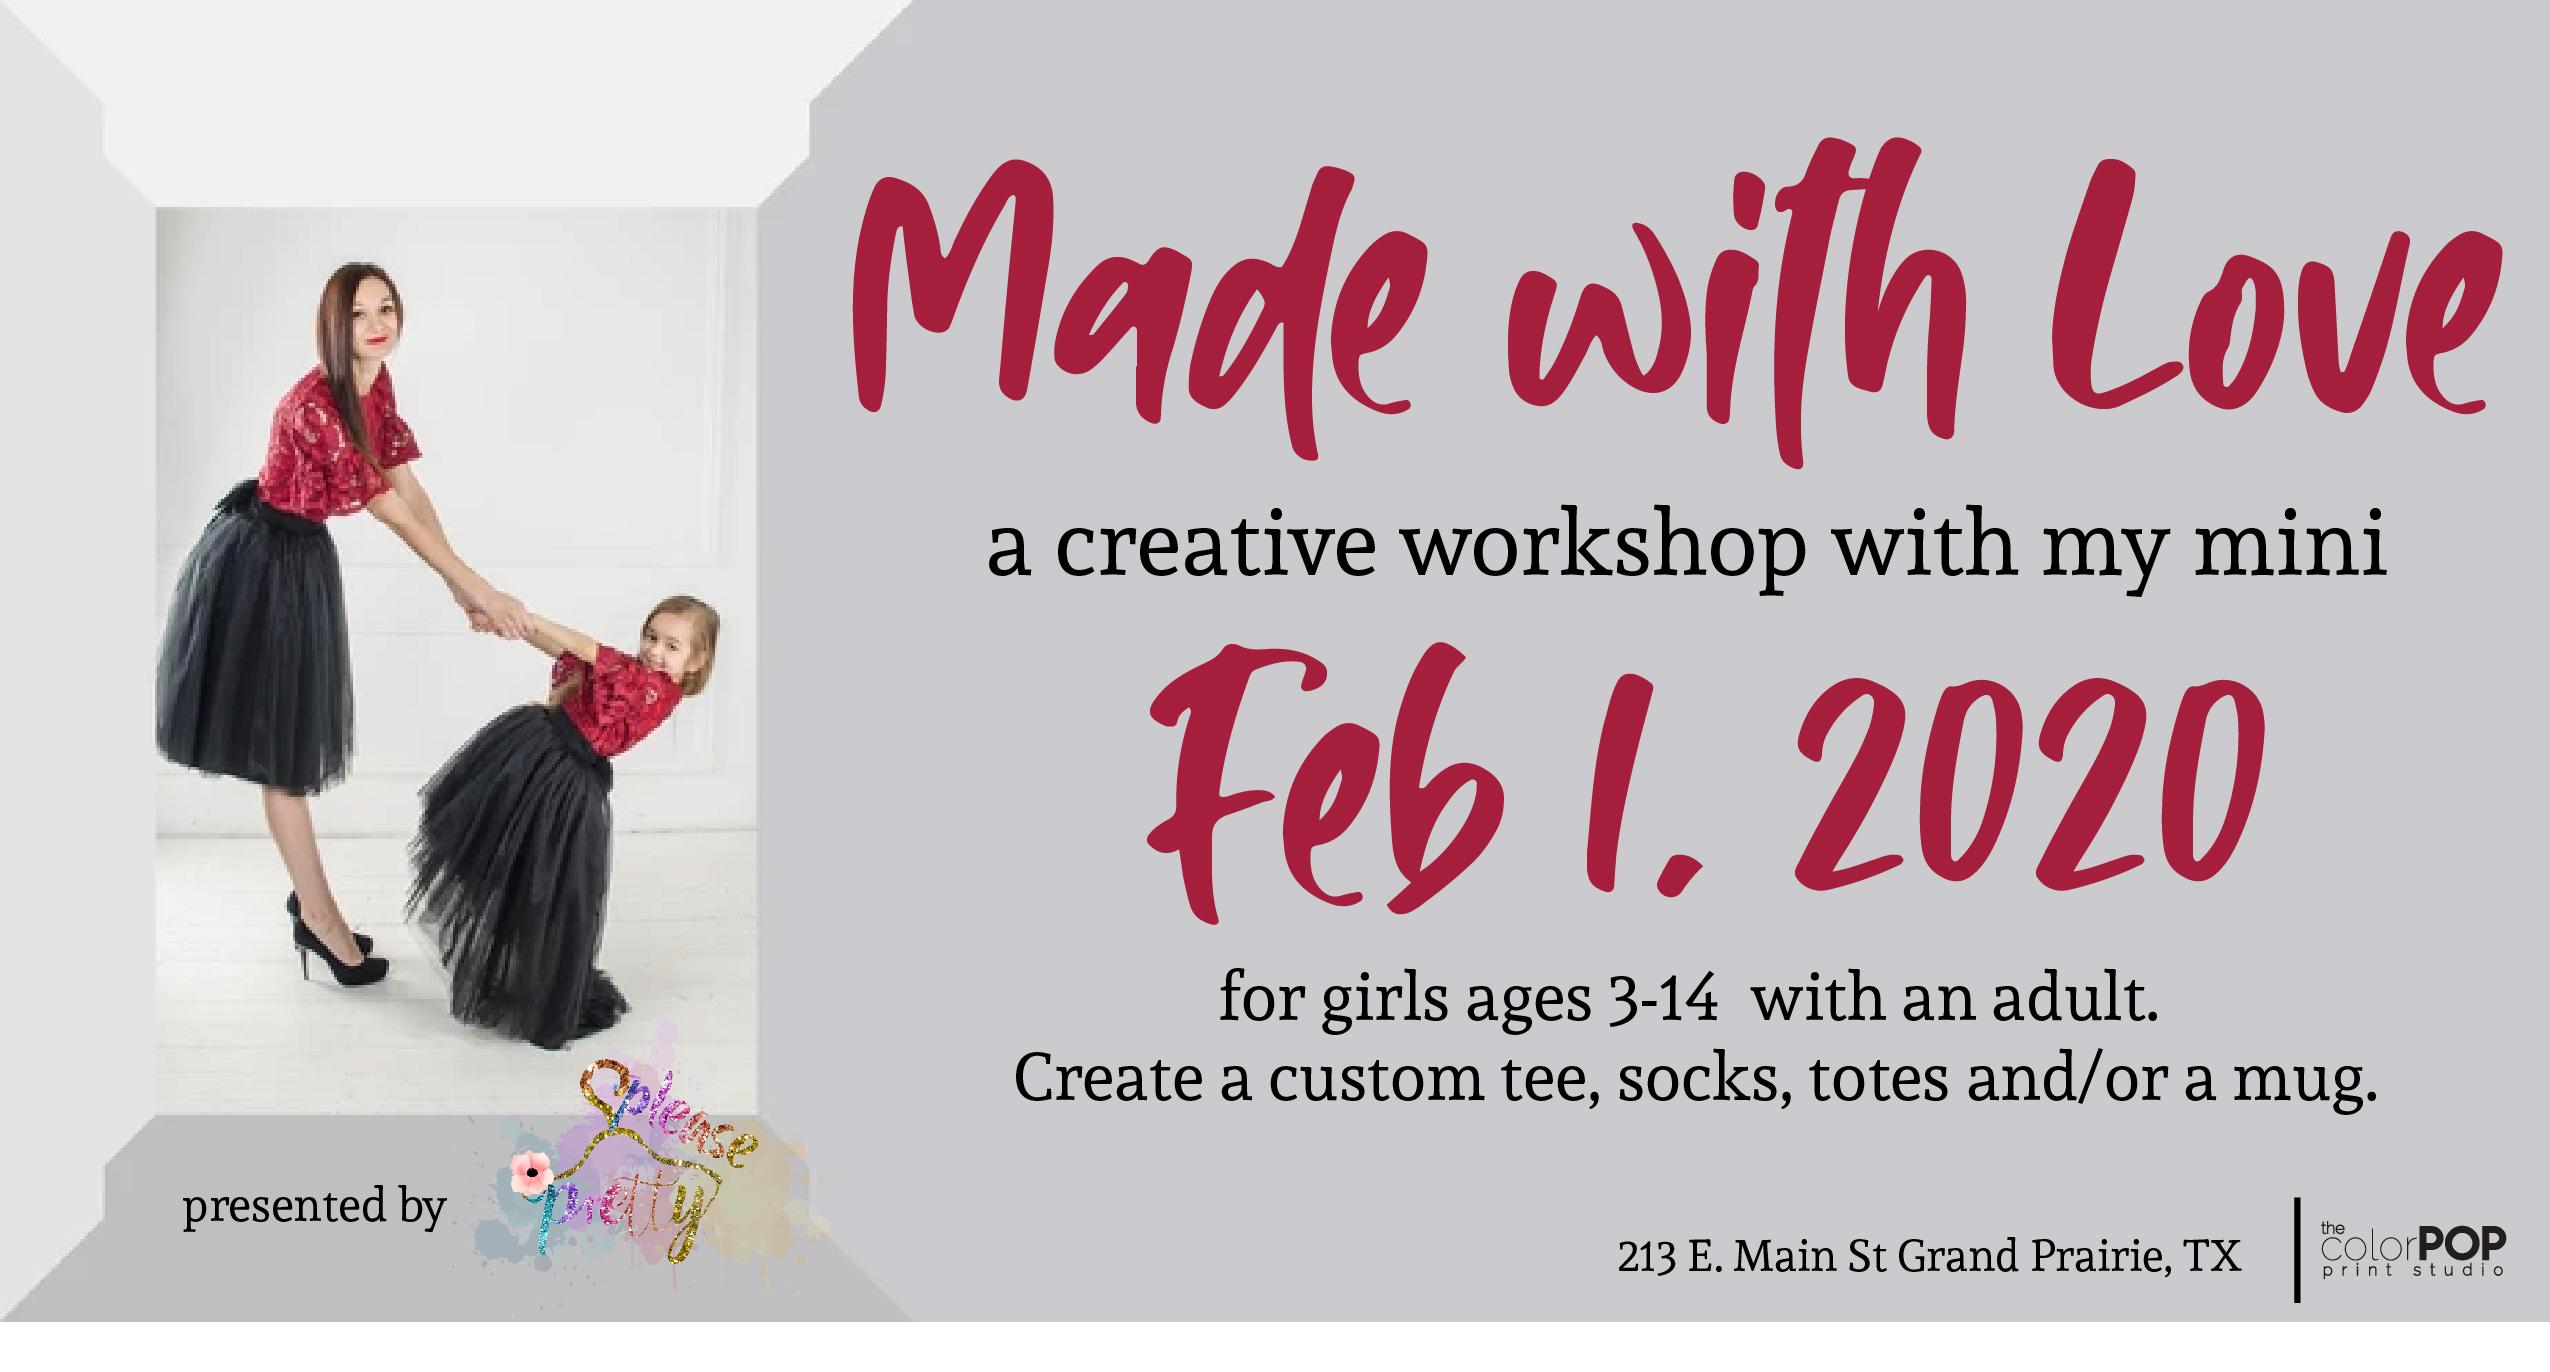 Made with Love -a creative workshop with my mini